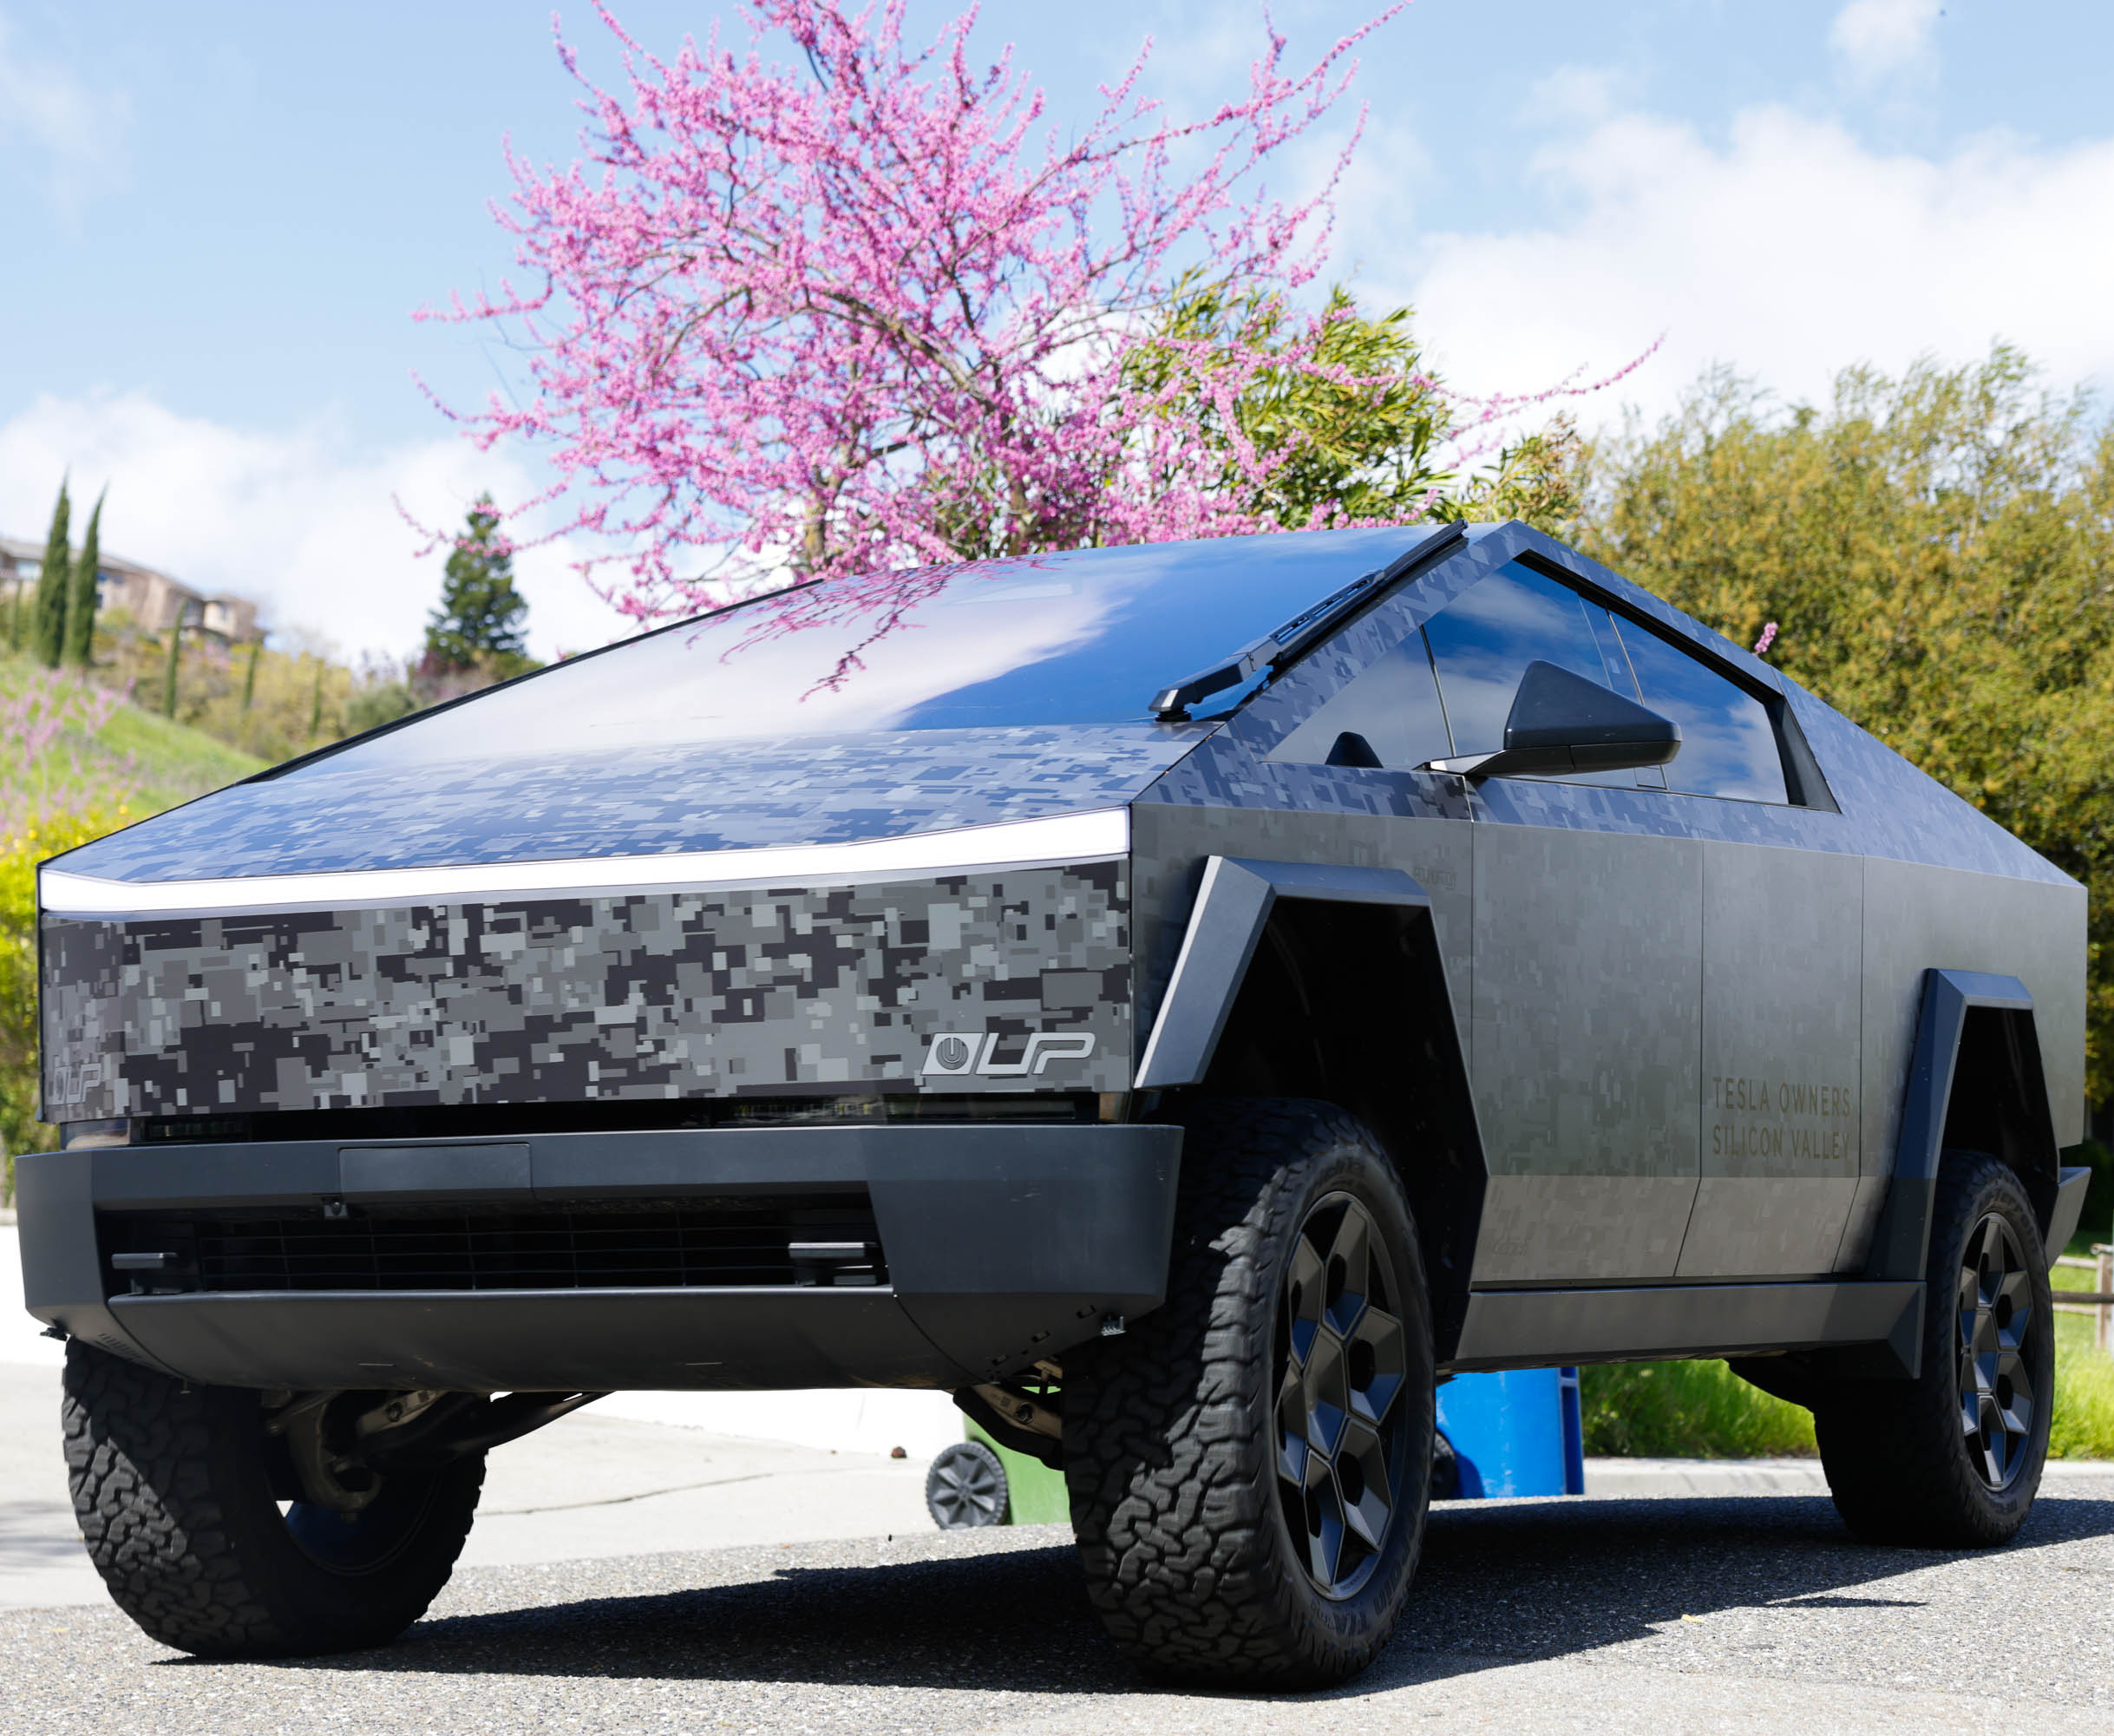 A futuristic-looking electric pickup truck with a sharp, angular design parked outdoors with blooming pink trees in the background.